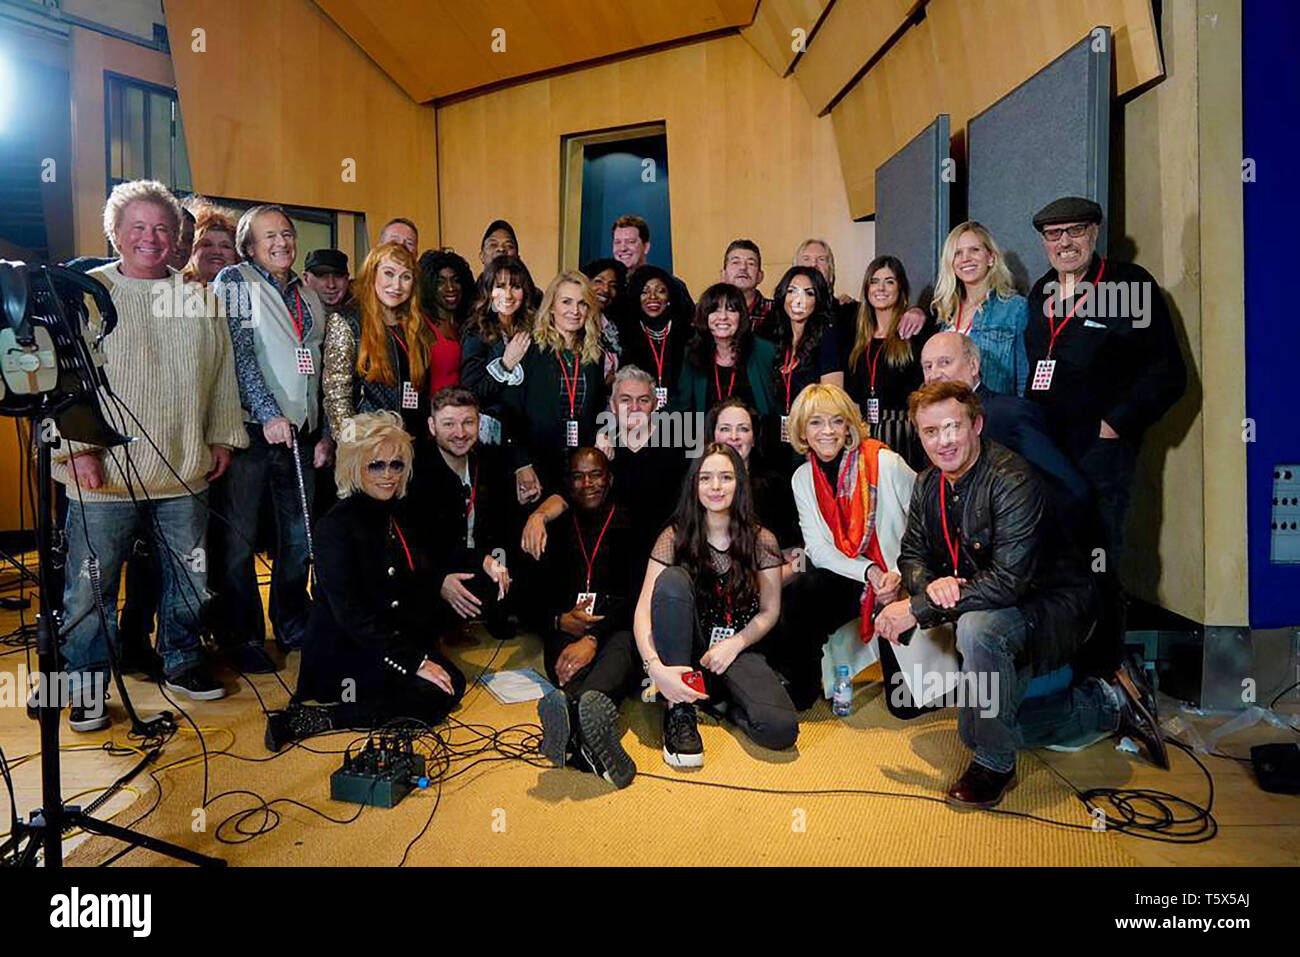 Celebrities Gather For Recording Of Single Cover Of He Ain't Heavy, He's My Brother, London, United Kingdom, 16th February 2019 Credit Nicky Cook Stock Photo